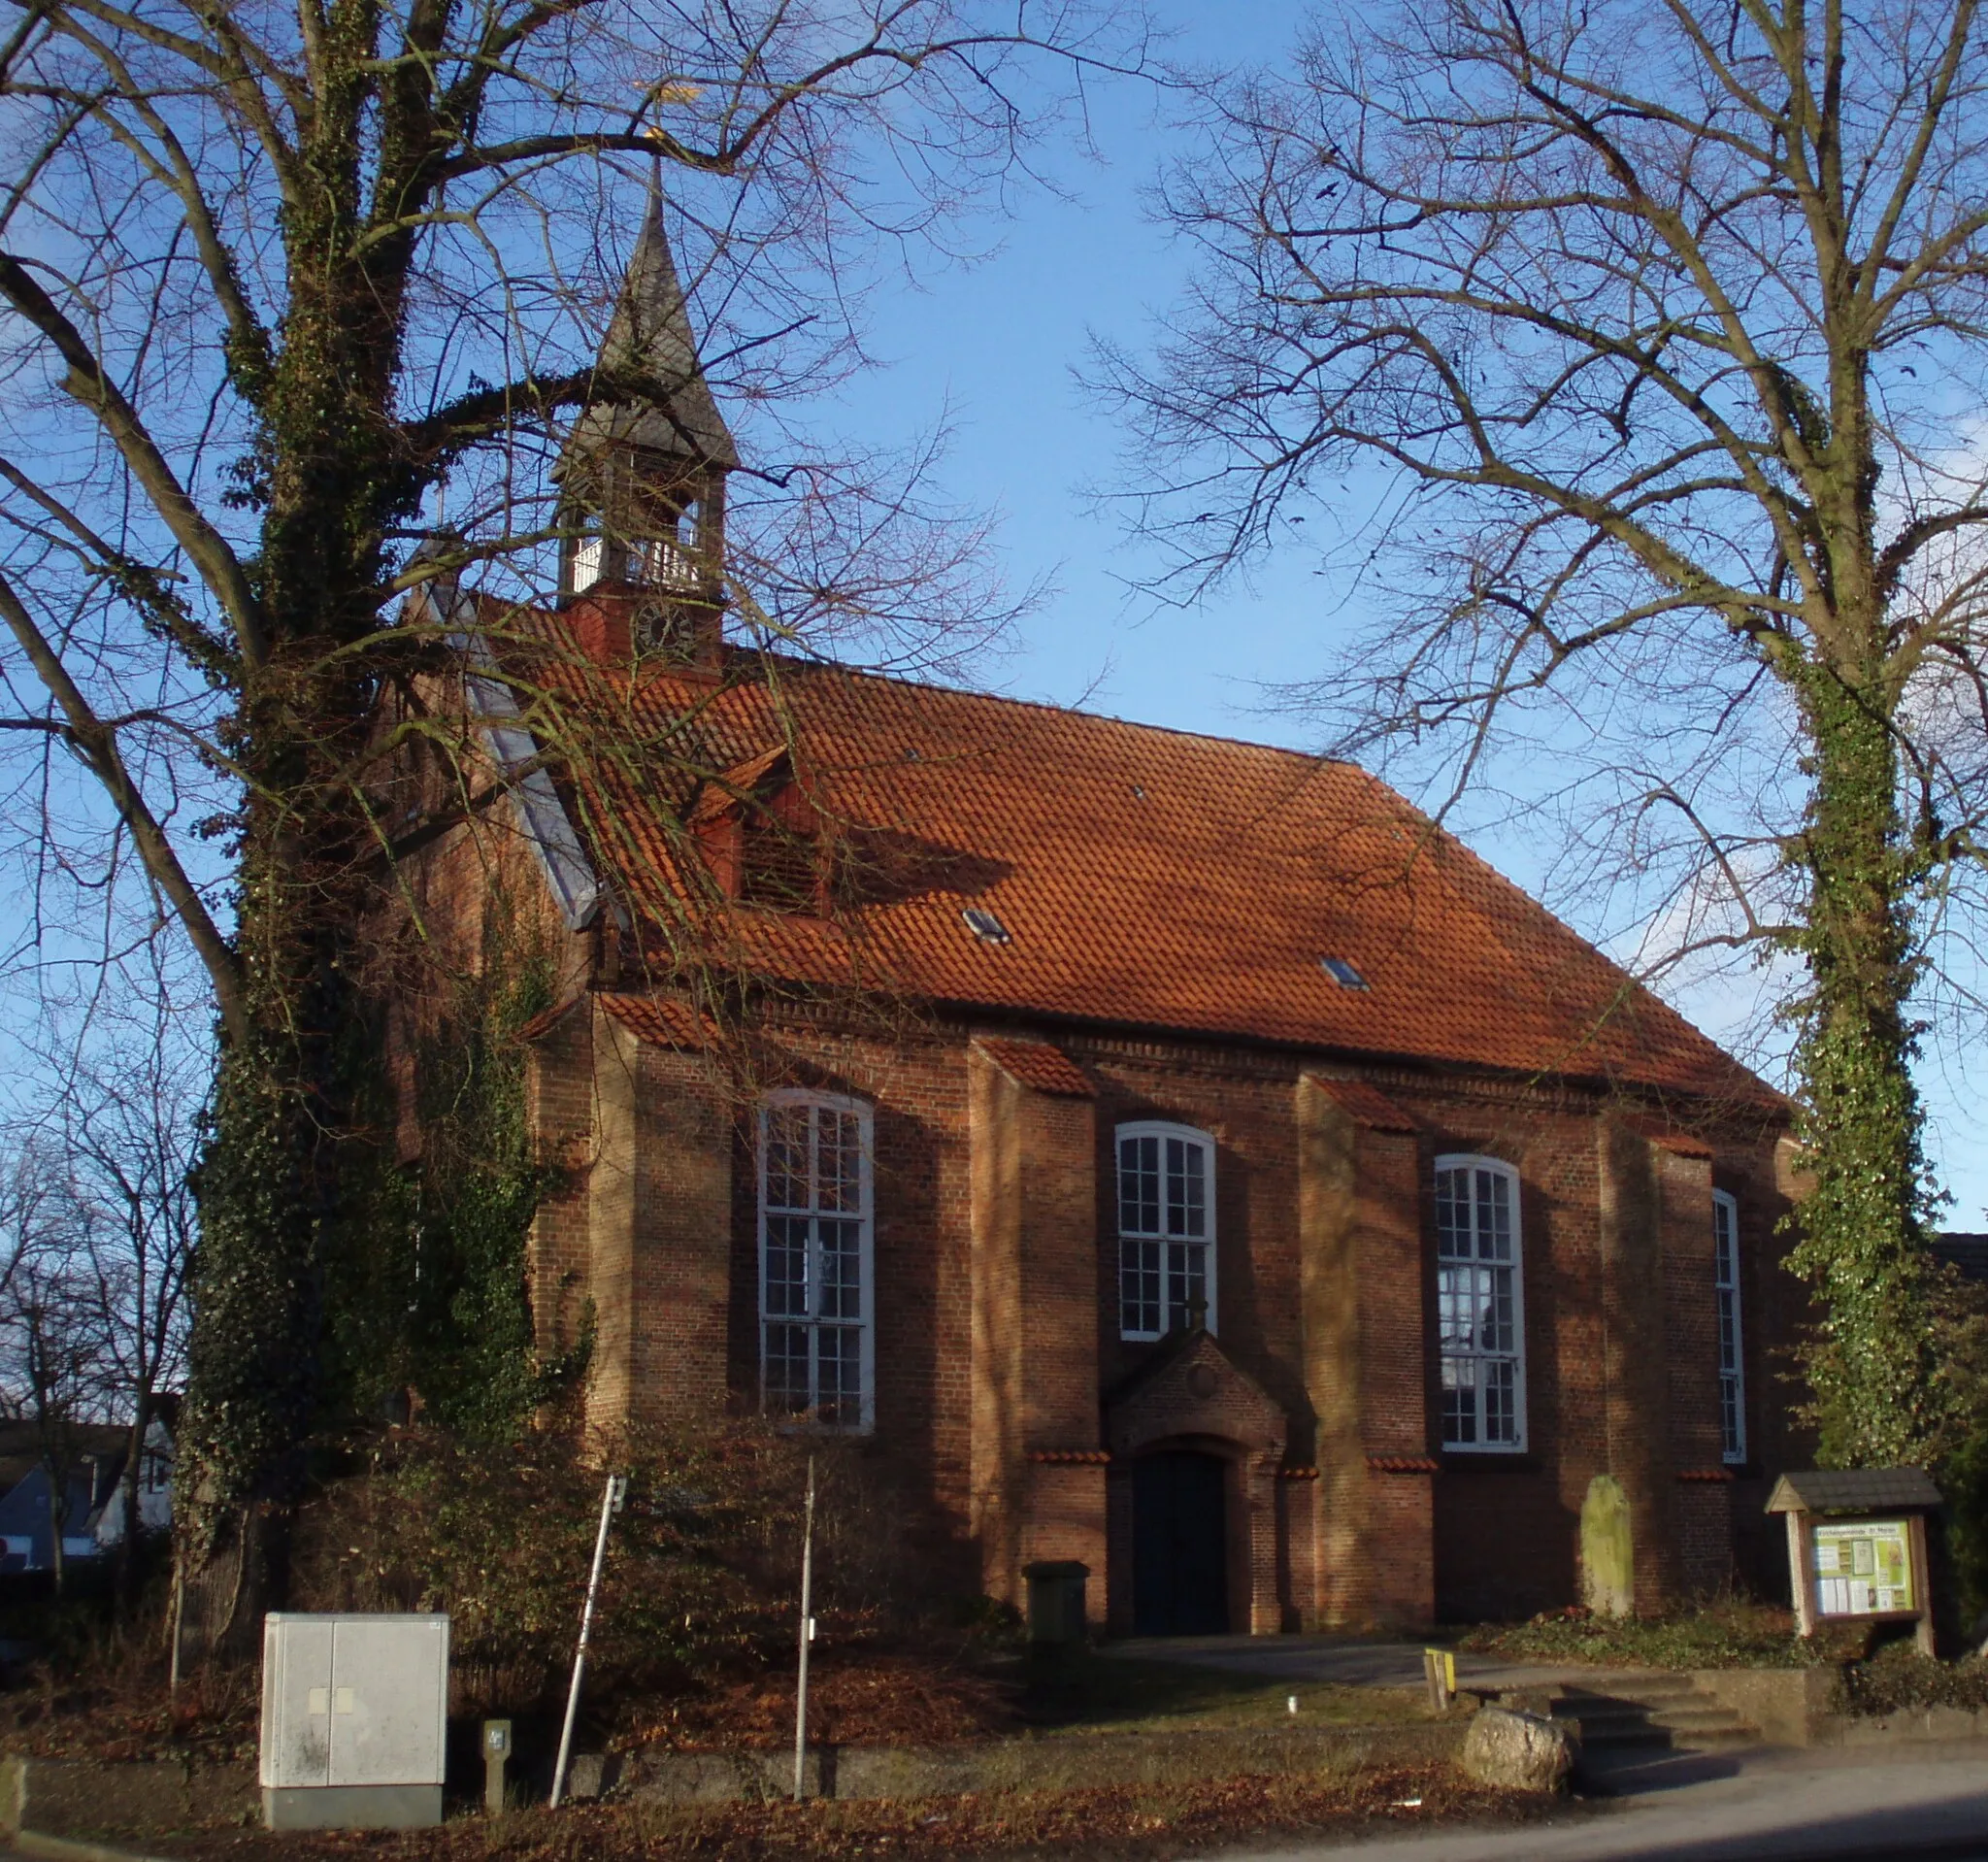 Photo showing: The Evangelical Lutheran St. Mary's Church in Himmelpforten, Lower Saxony, Germany.